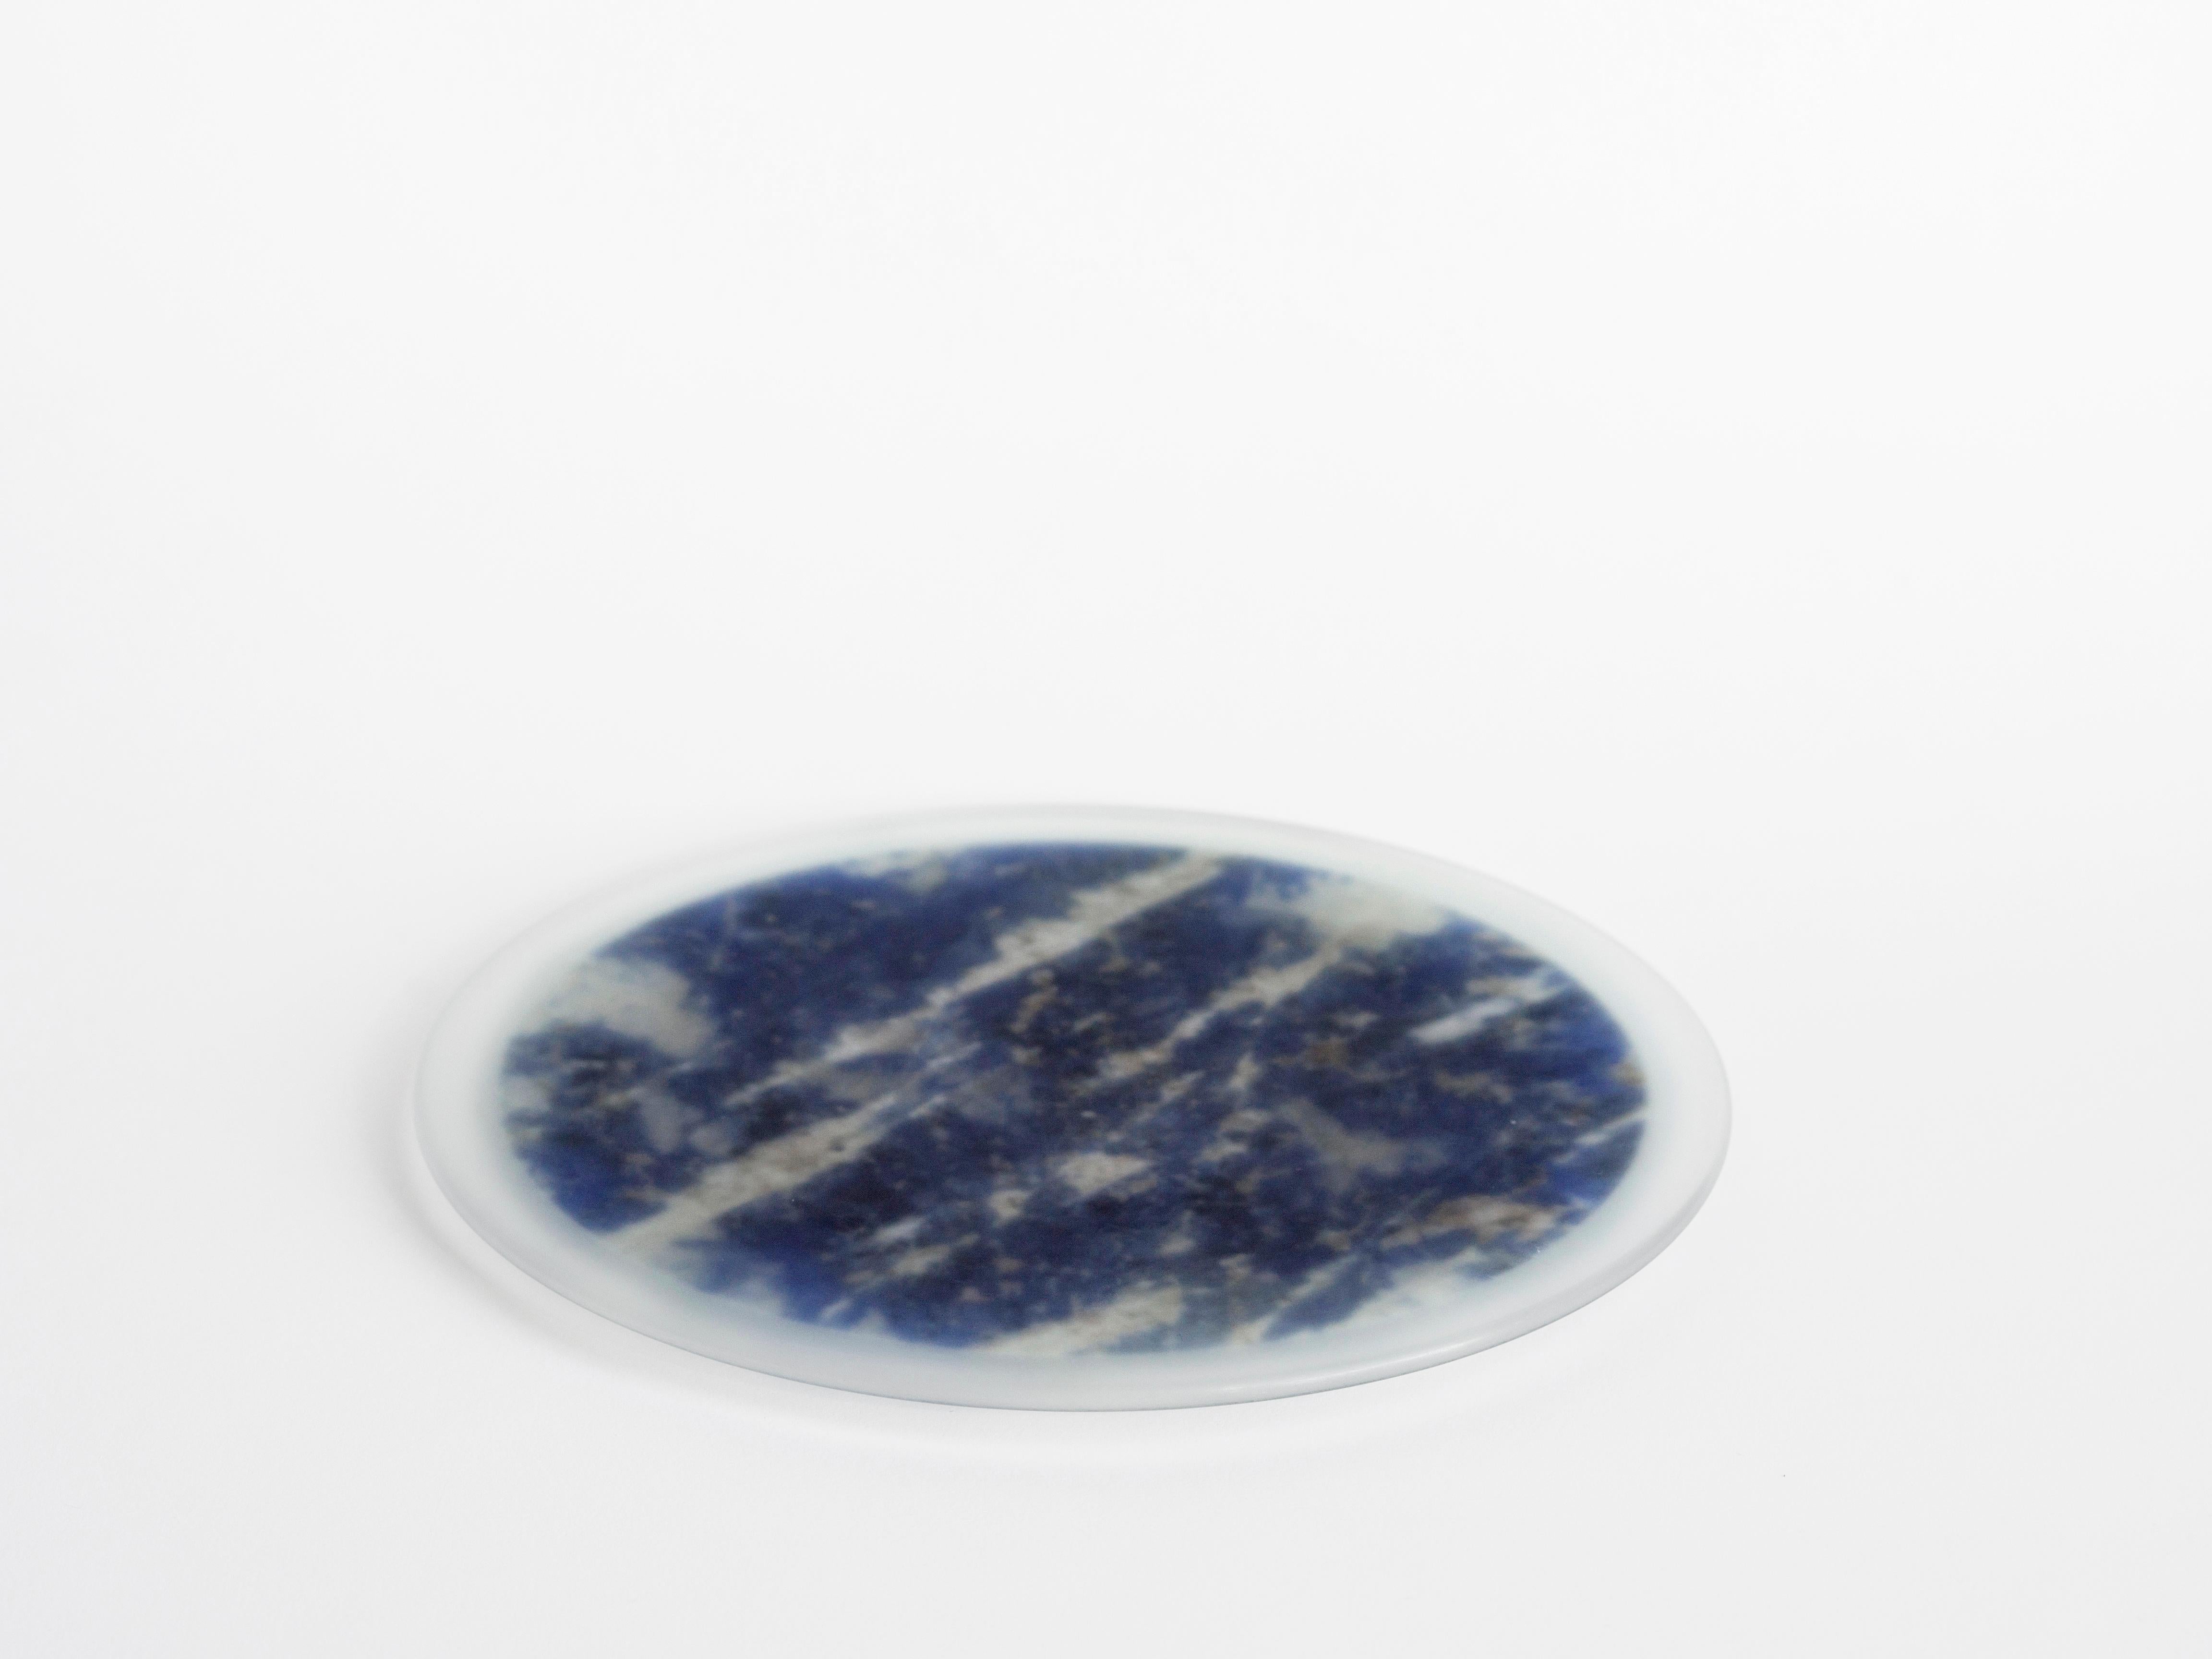 Centerpieces and serving plates in marble and glass, a slow manual processing define new forms where lightness, transparency and thickness to the structural limit become The Protagonists; vitrified signs left by time. Transparency of matter and